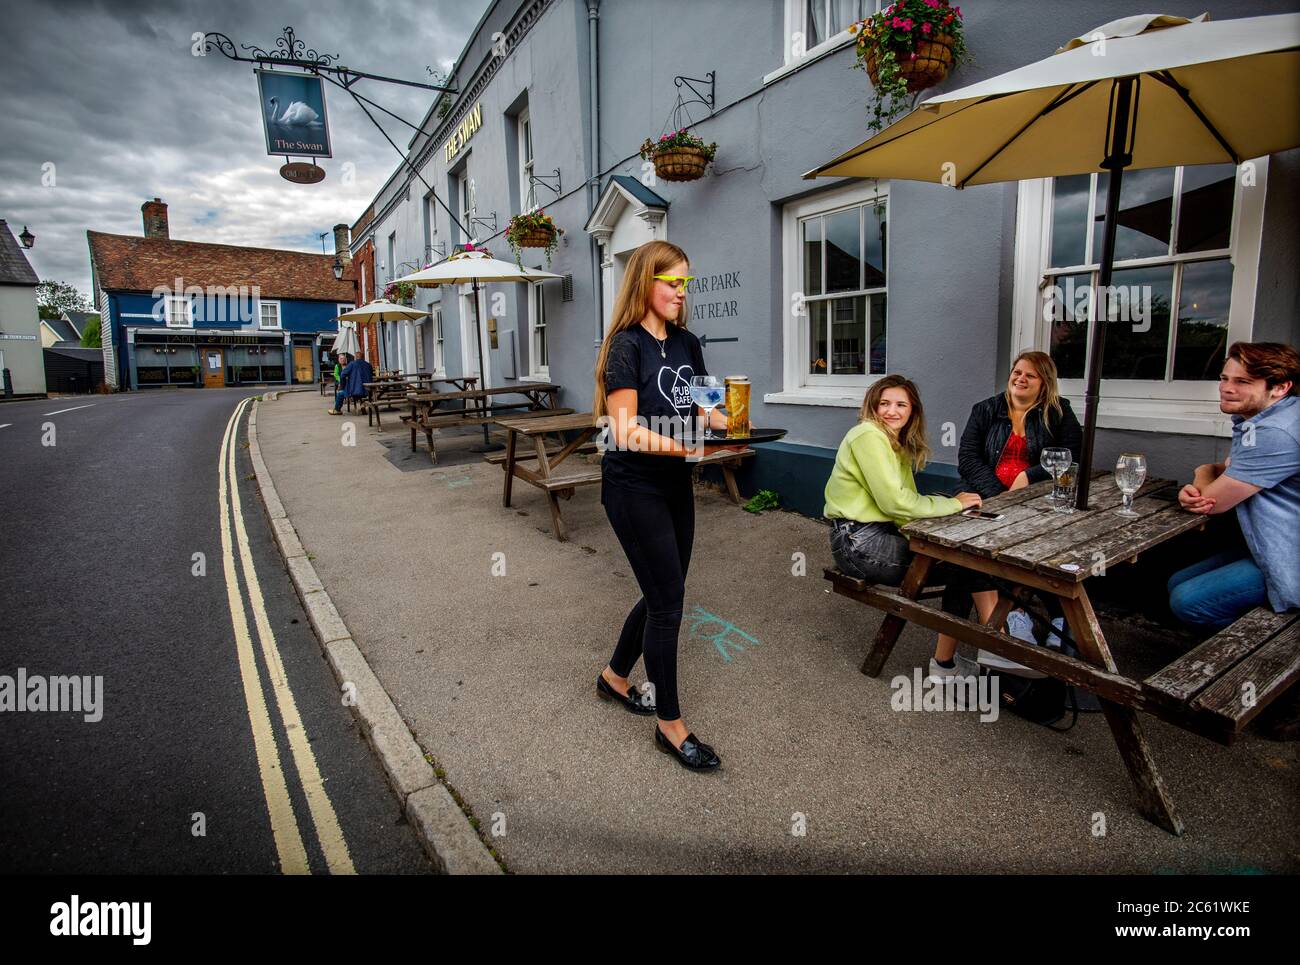 Thaxted, UK. 06th July, 2020. Thaxted Essex UK. Swan Pub re opens after Covid-19 three month Coronavirus lockdown. 6 July 2020 Staff wearing personal protective equipment (PPE) visor as they serve drinks to customers seated outside the front of the pub at The Bullring in the medieval town of Thaxted in north Essex, England. Customers order their drinks after giving mobile/cell phone numbers and names in if they need to be contacted in case of a local Covid-19 outbreak. Credit: BRIAN HARRIS/Alamy Live News Stock Photo